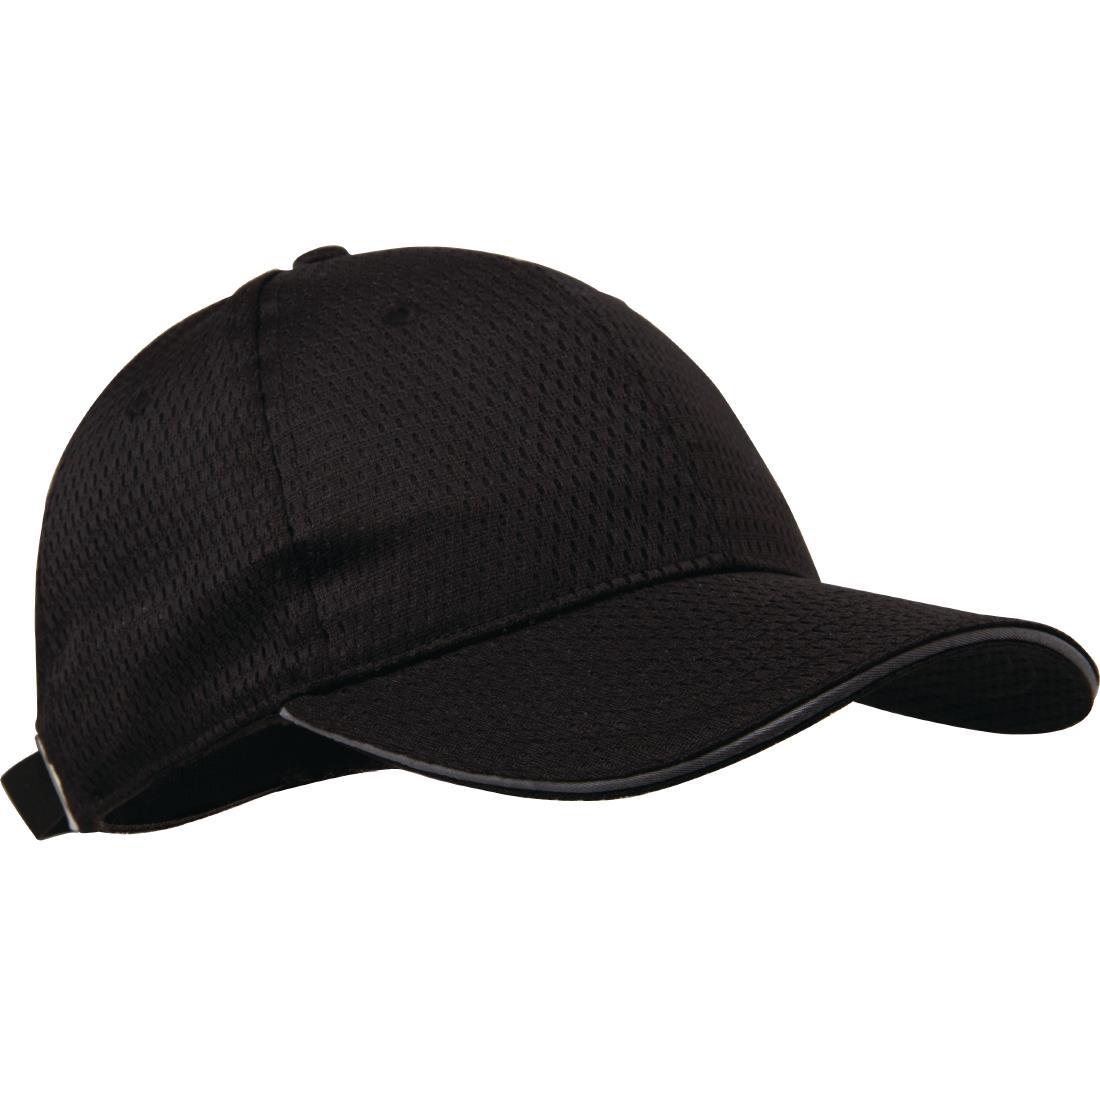 Chef Works Cool Vent Baseball Cap with Grey - A942  - 3